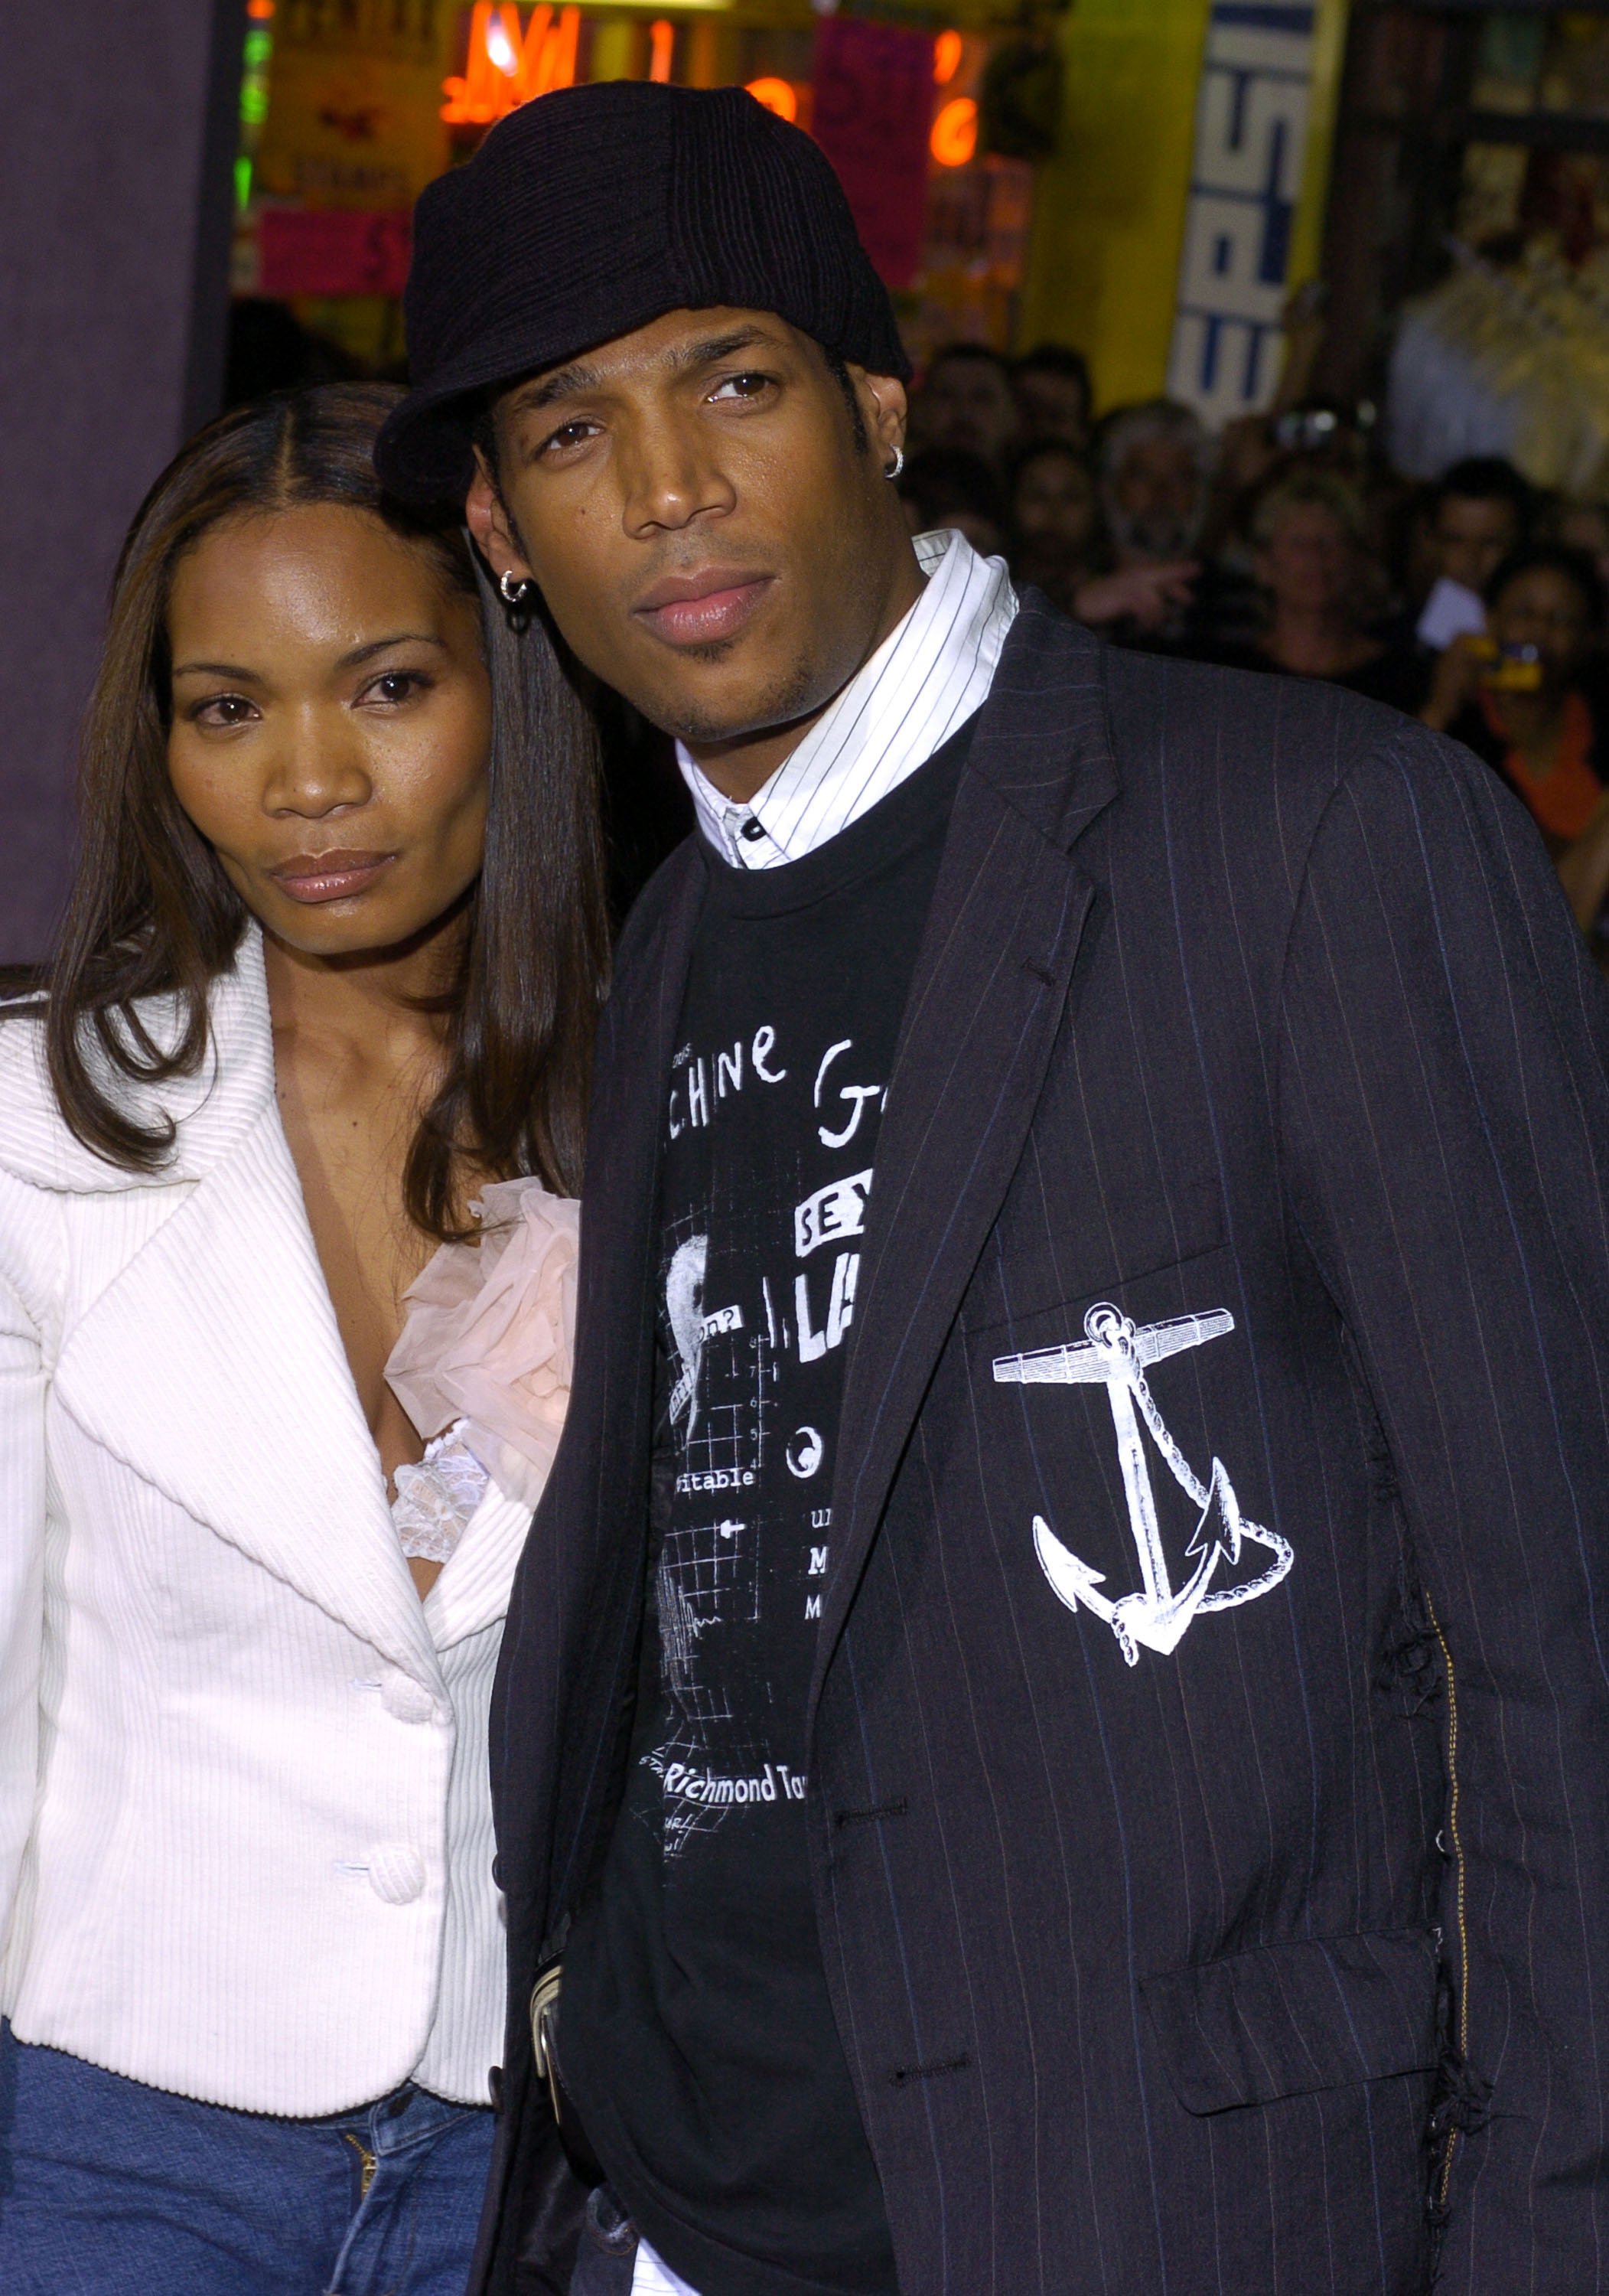 Marlon Wayans and Angelica Zachary at the premiere of "The Ladykillers" on March 12, 2004, in California. | Source: Getty Images